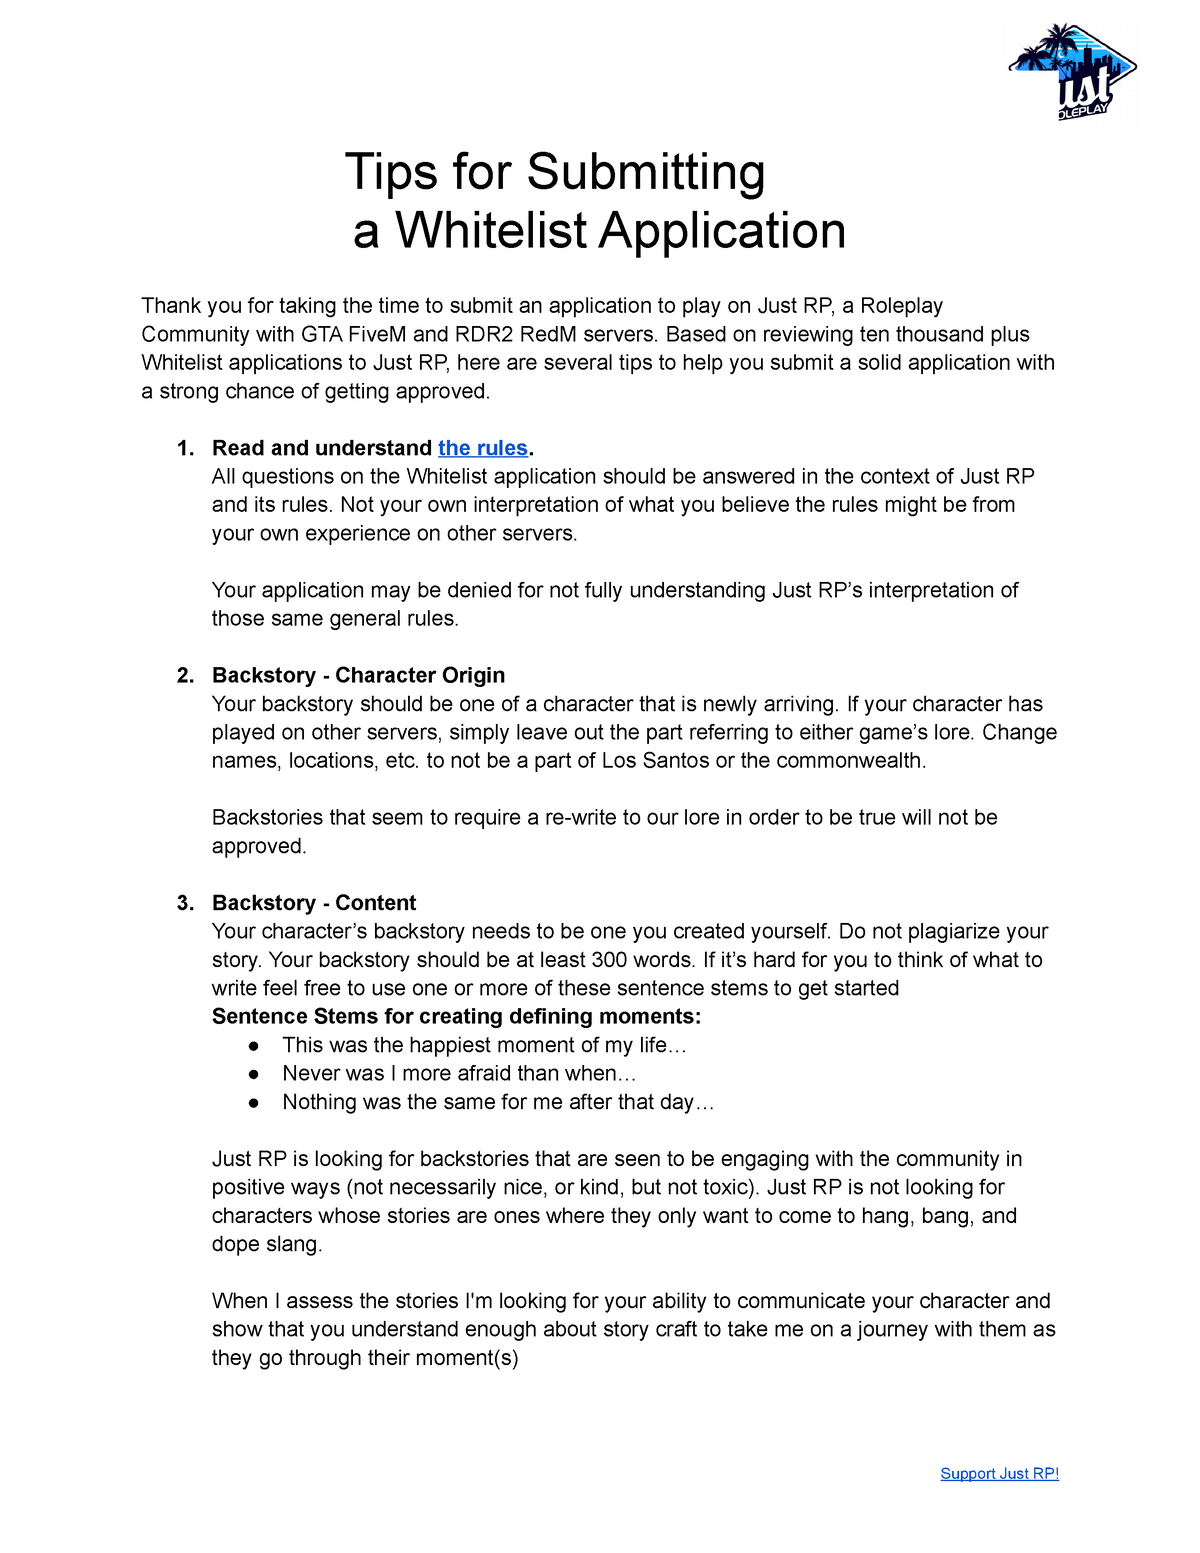 Tips for Submitting a Whitelist Application - Tips for Submitting a  Whitelist Application Thank you - Studocu